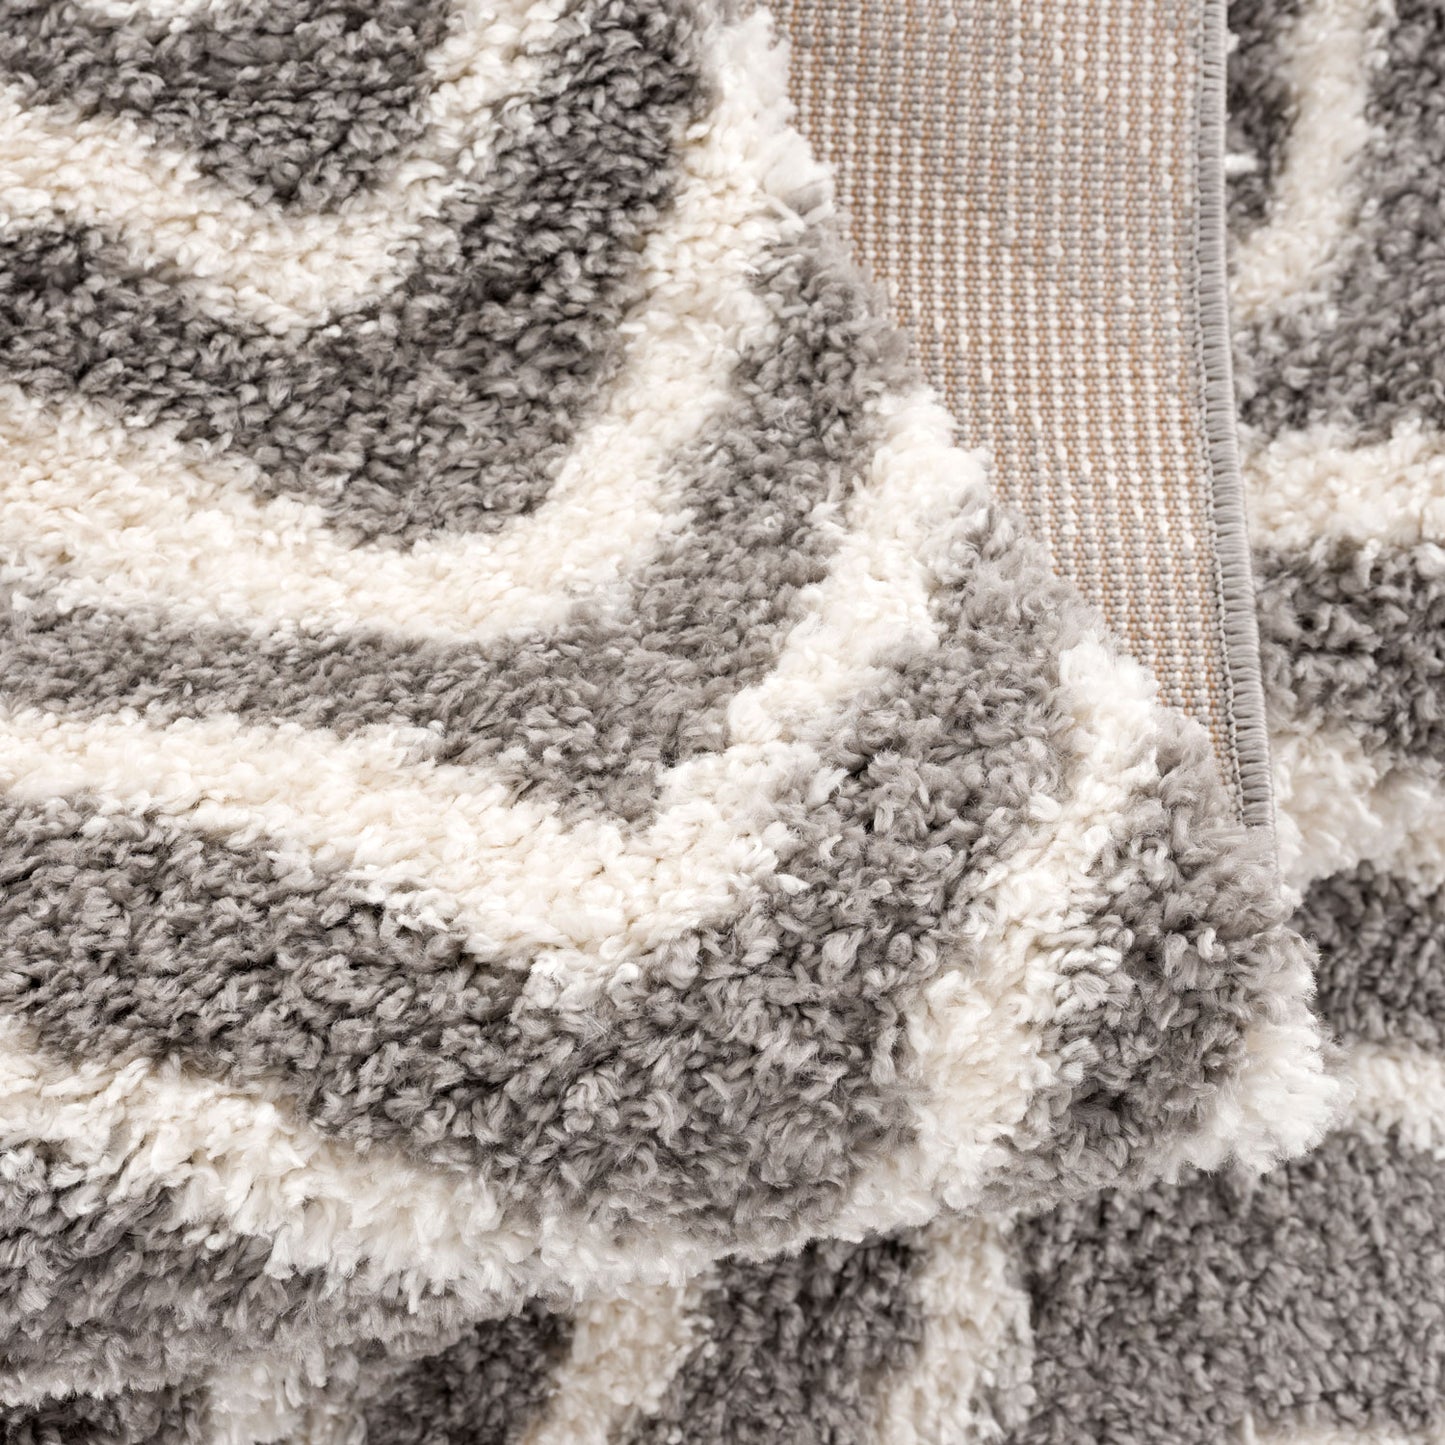 Tapis Pulpy 531 gris shaggy